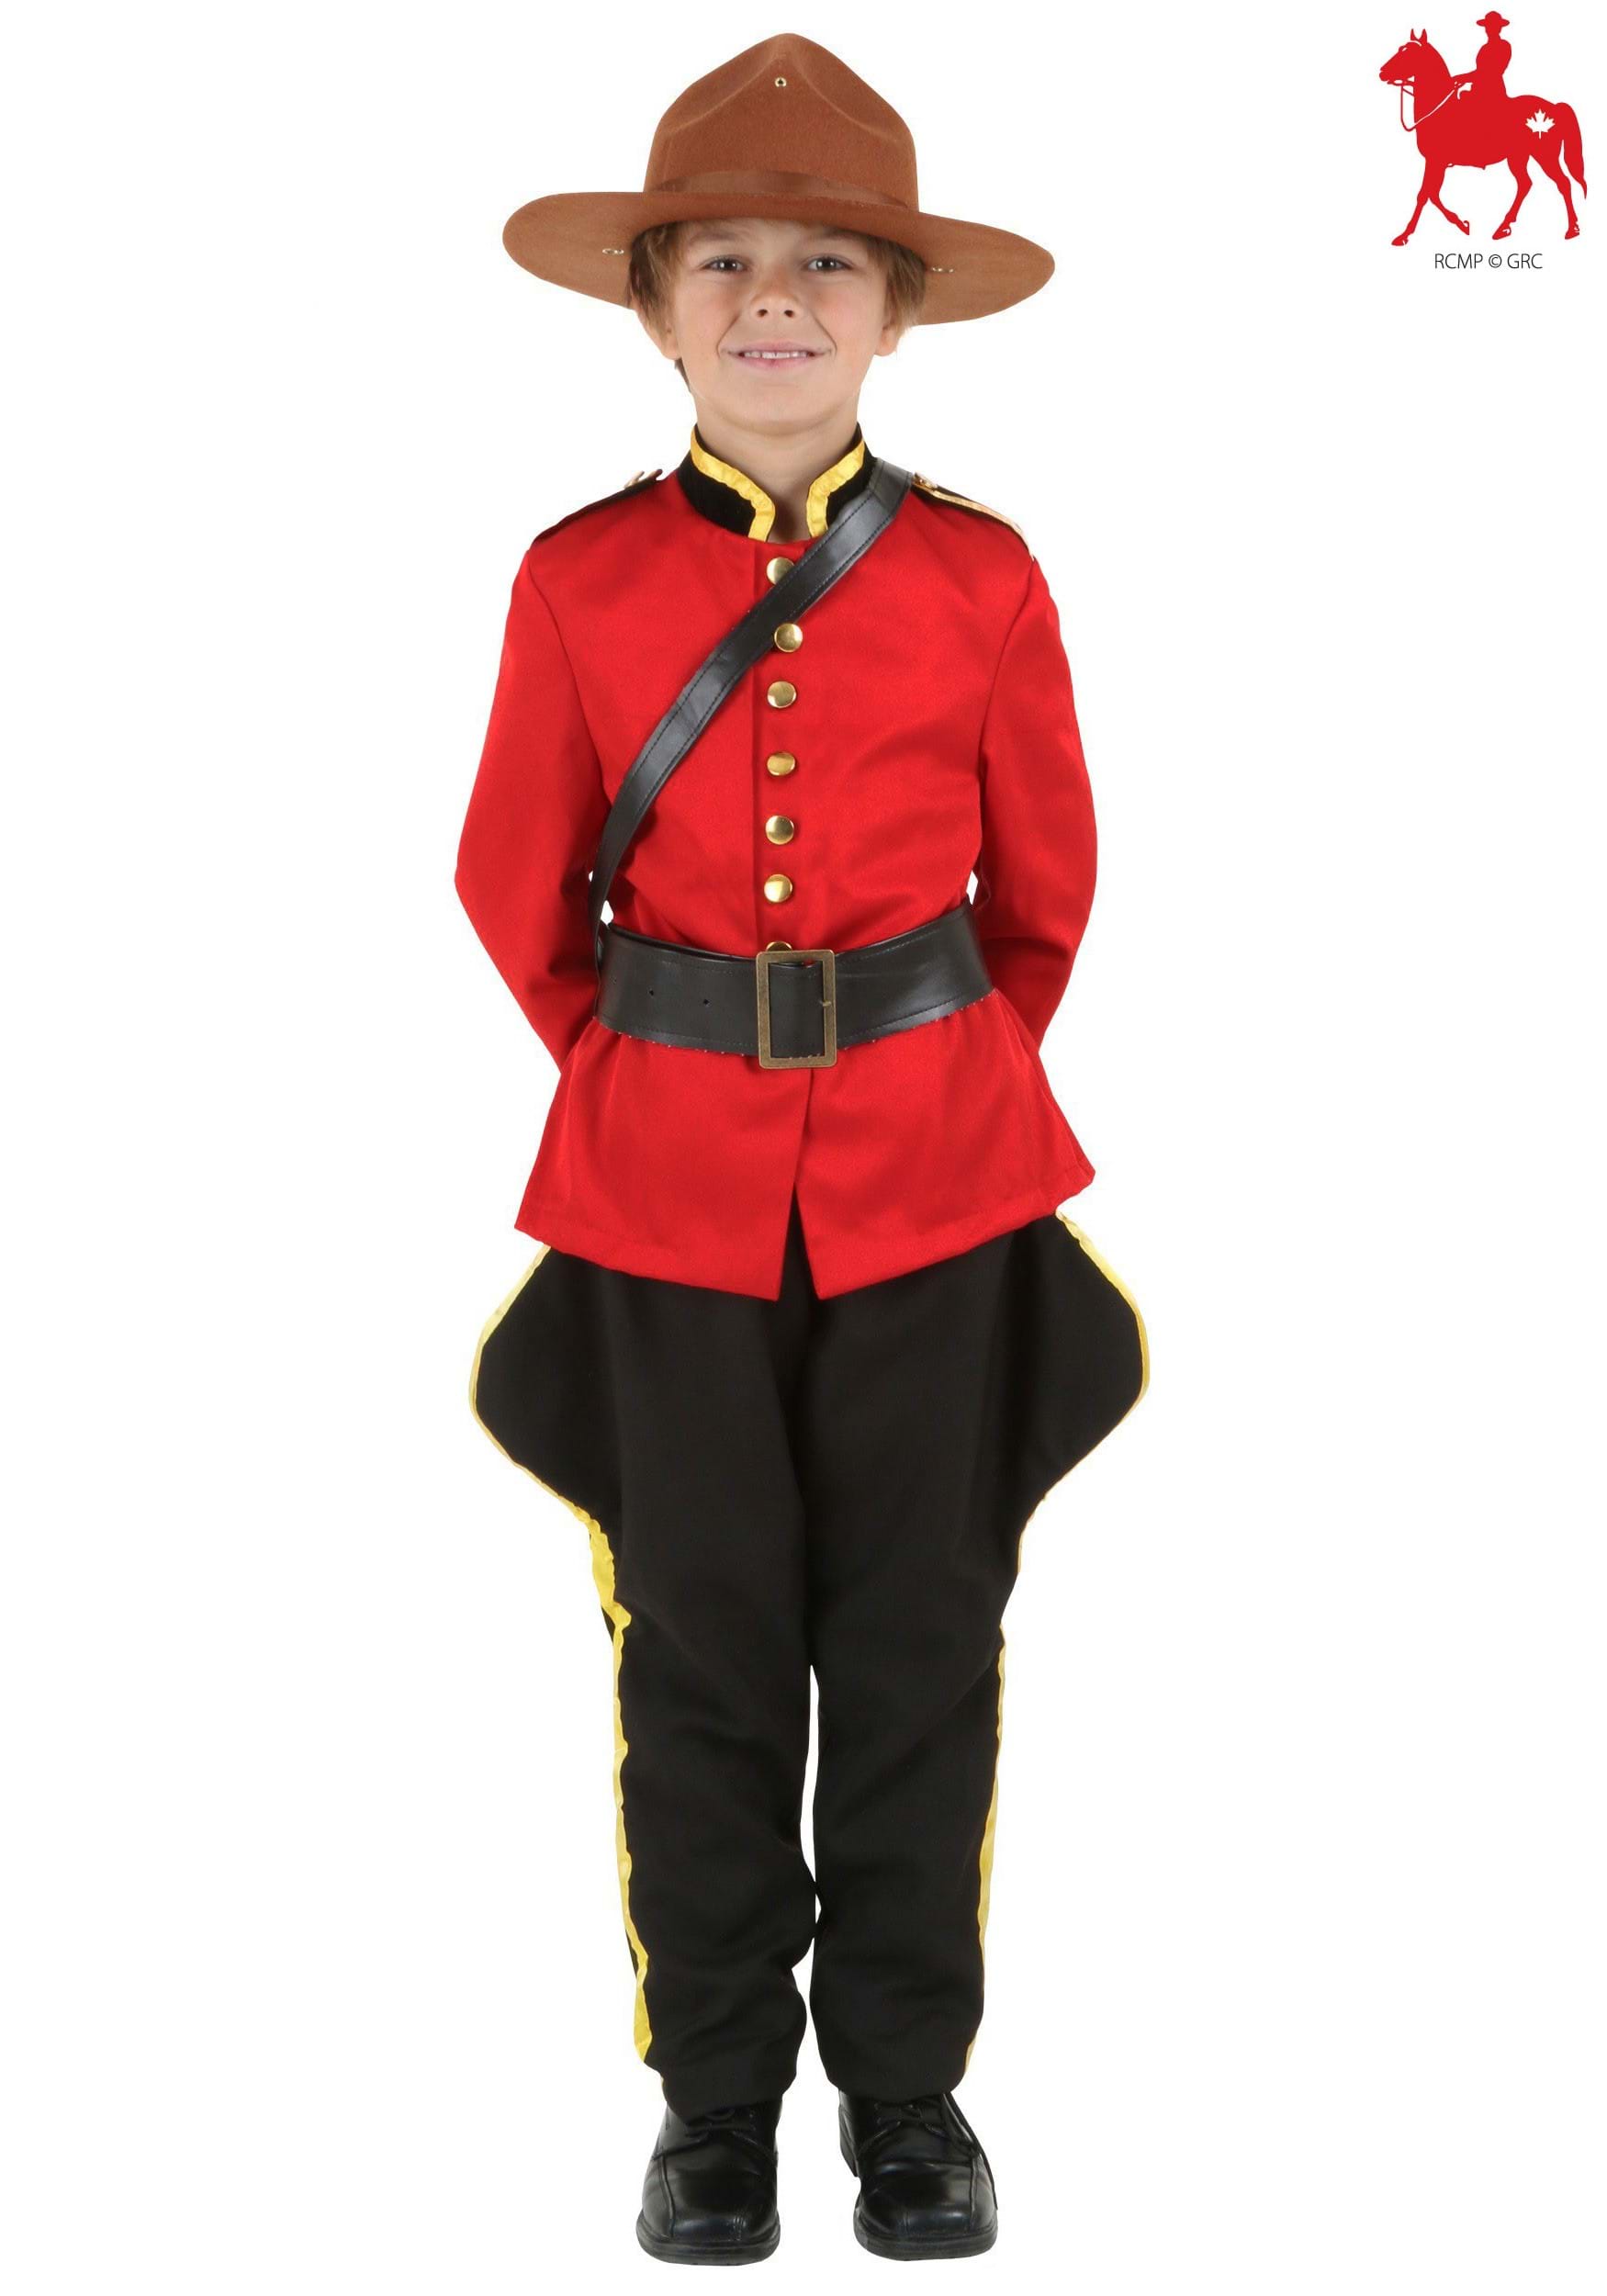 Clothing Boys Clothing Costumes Vintage Mountie Costume Boys RCMP Play Suit Size 4 